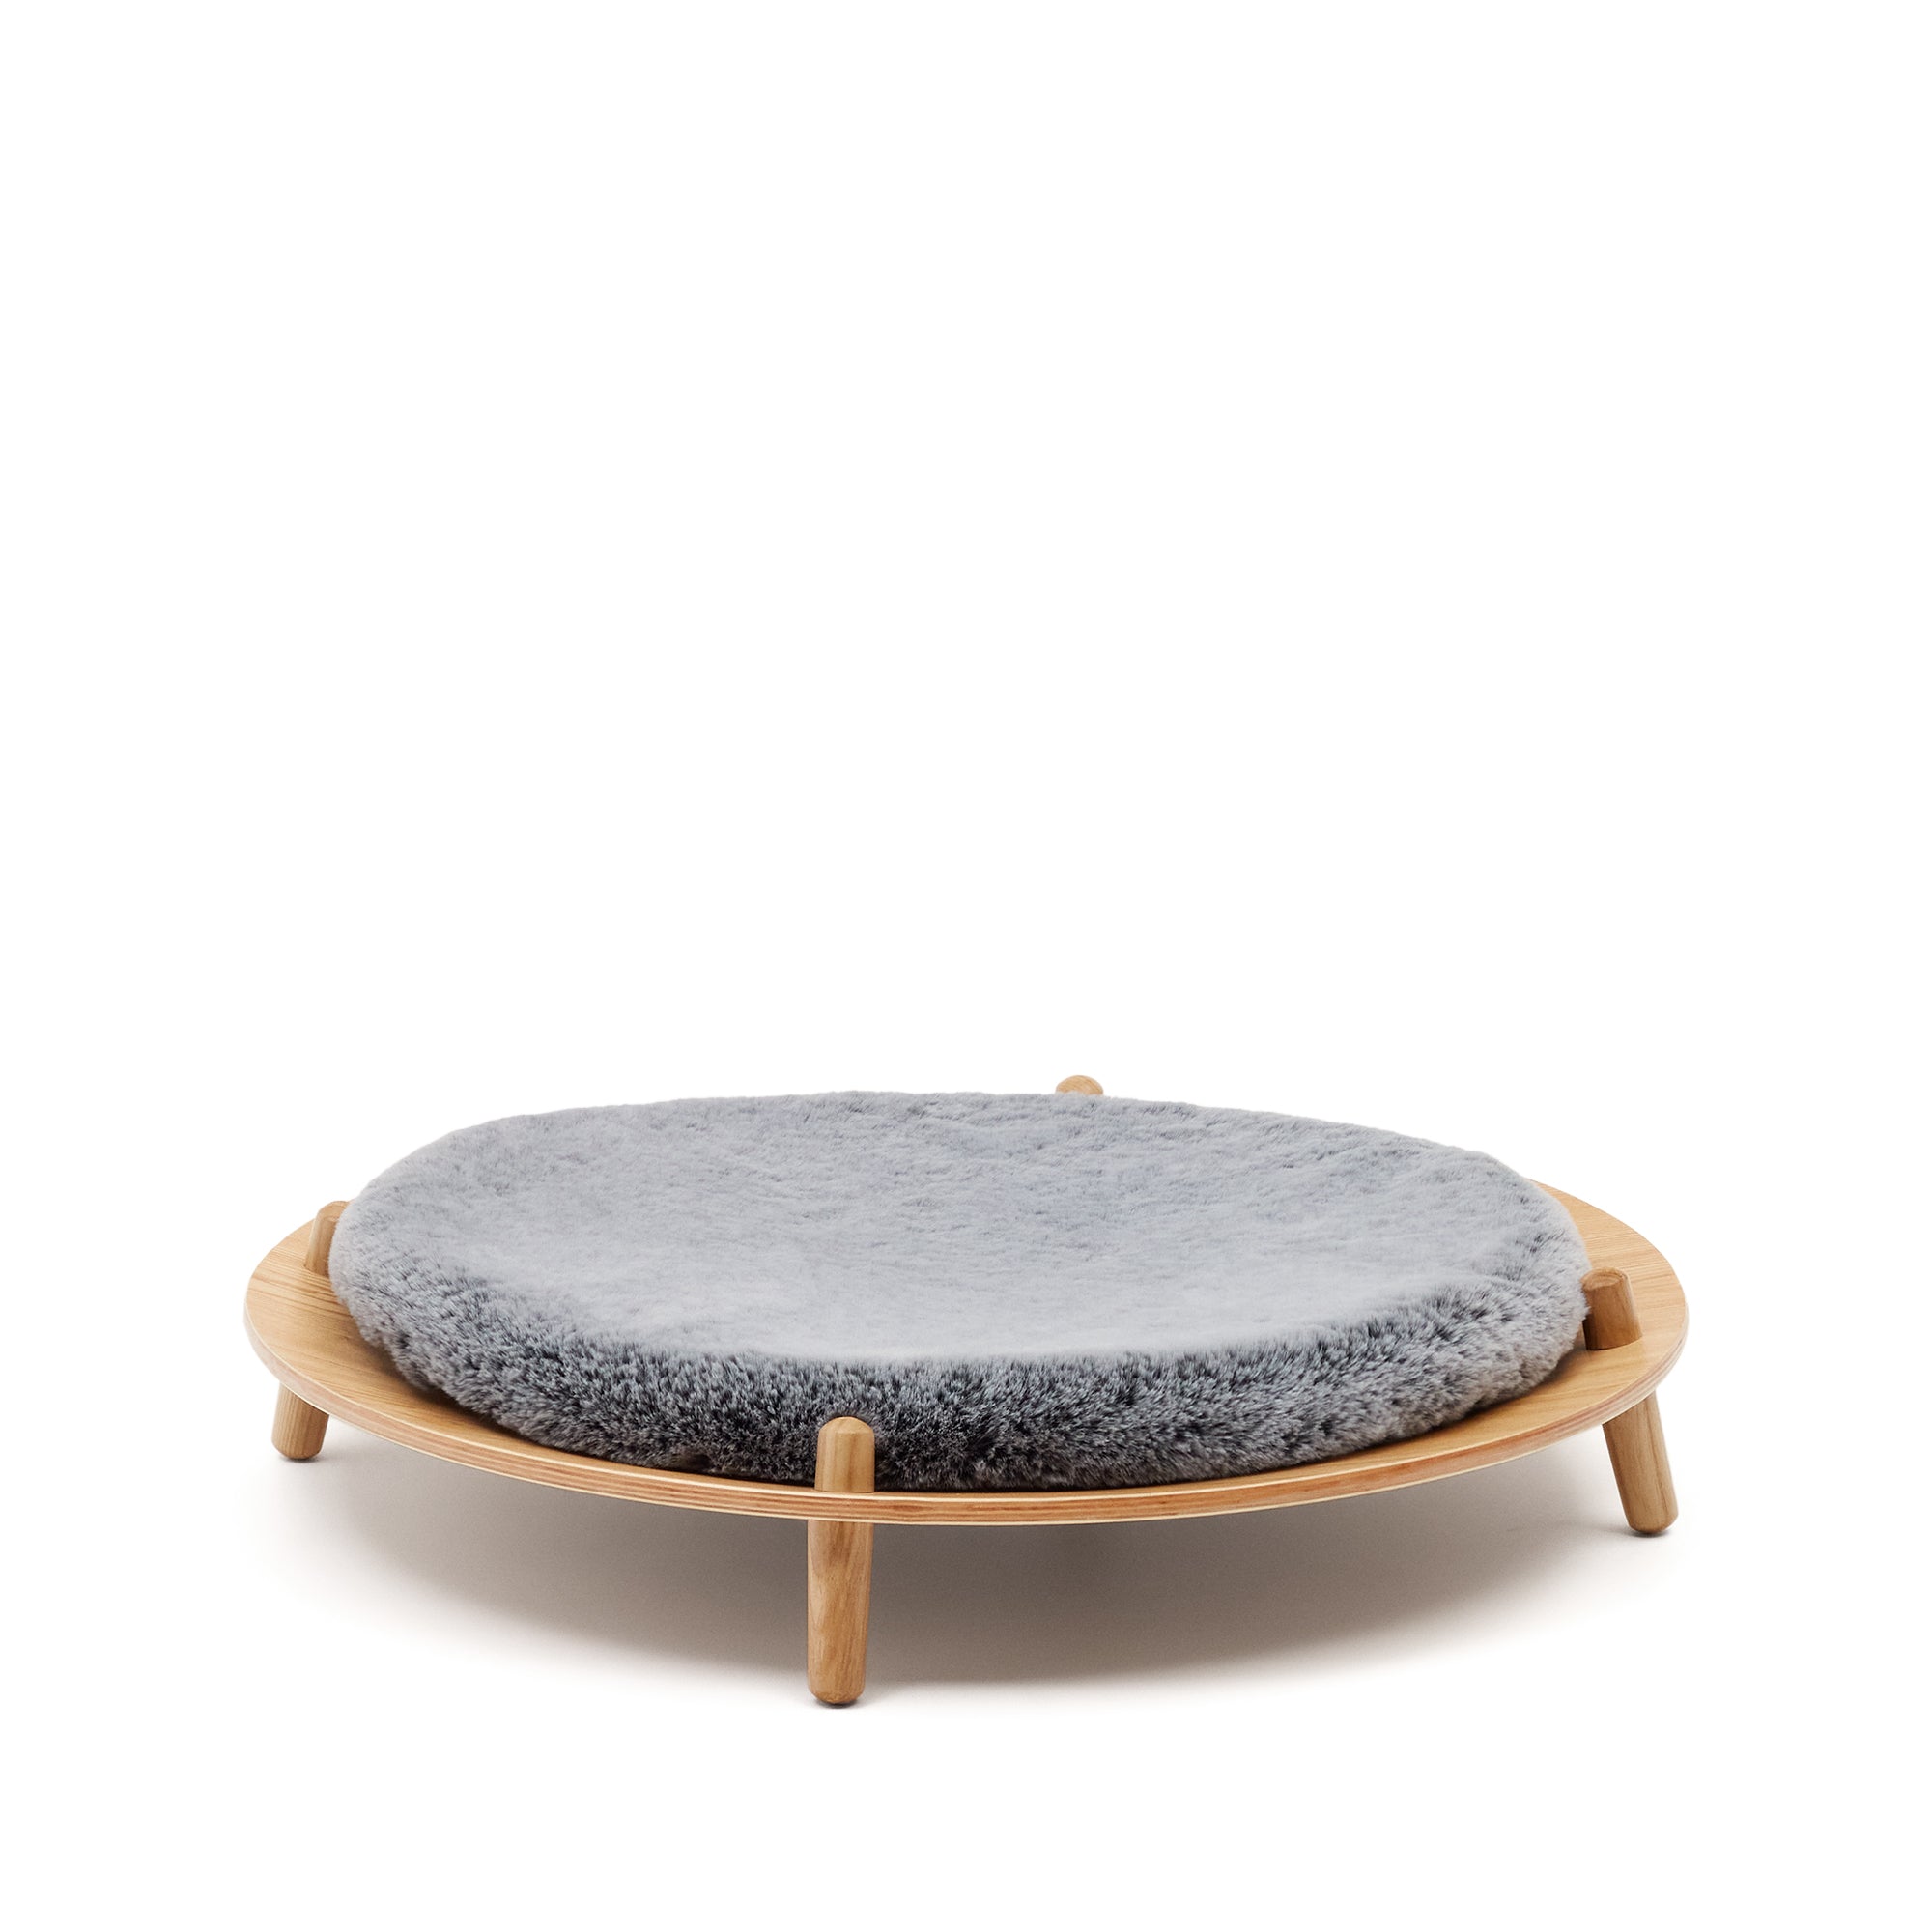 Bunola bed for pets made of ash plywood and cushion in grey fur, Ø 70 cm